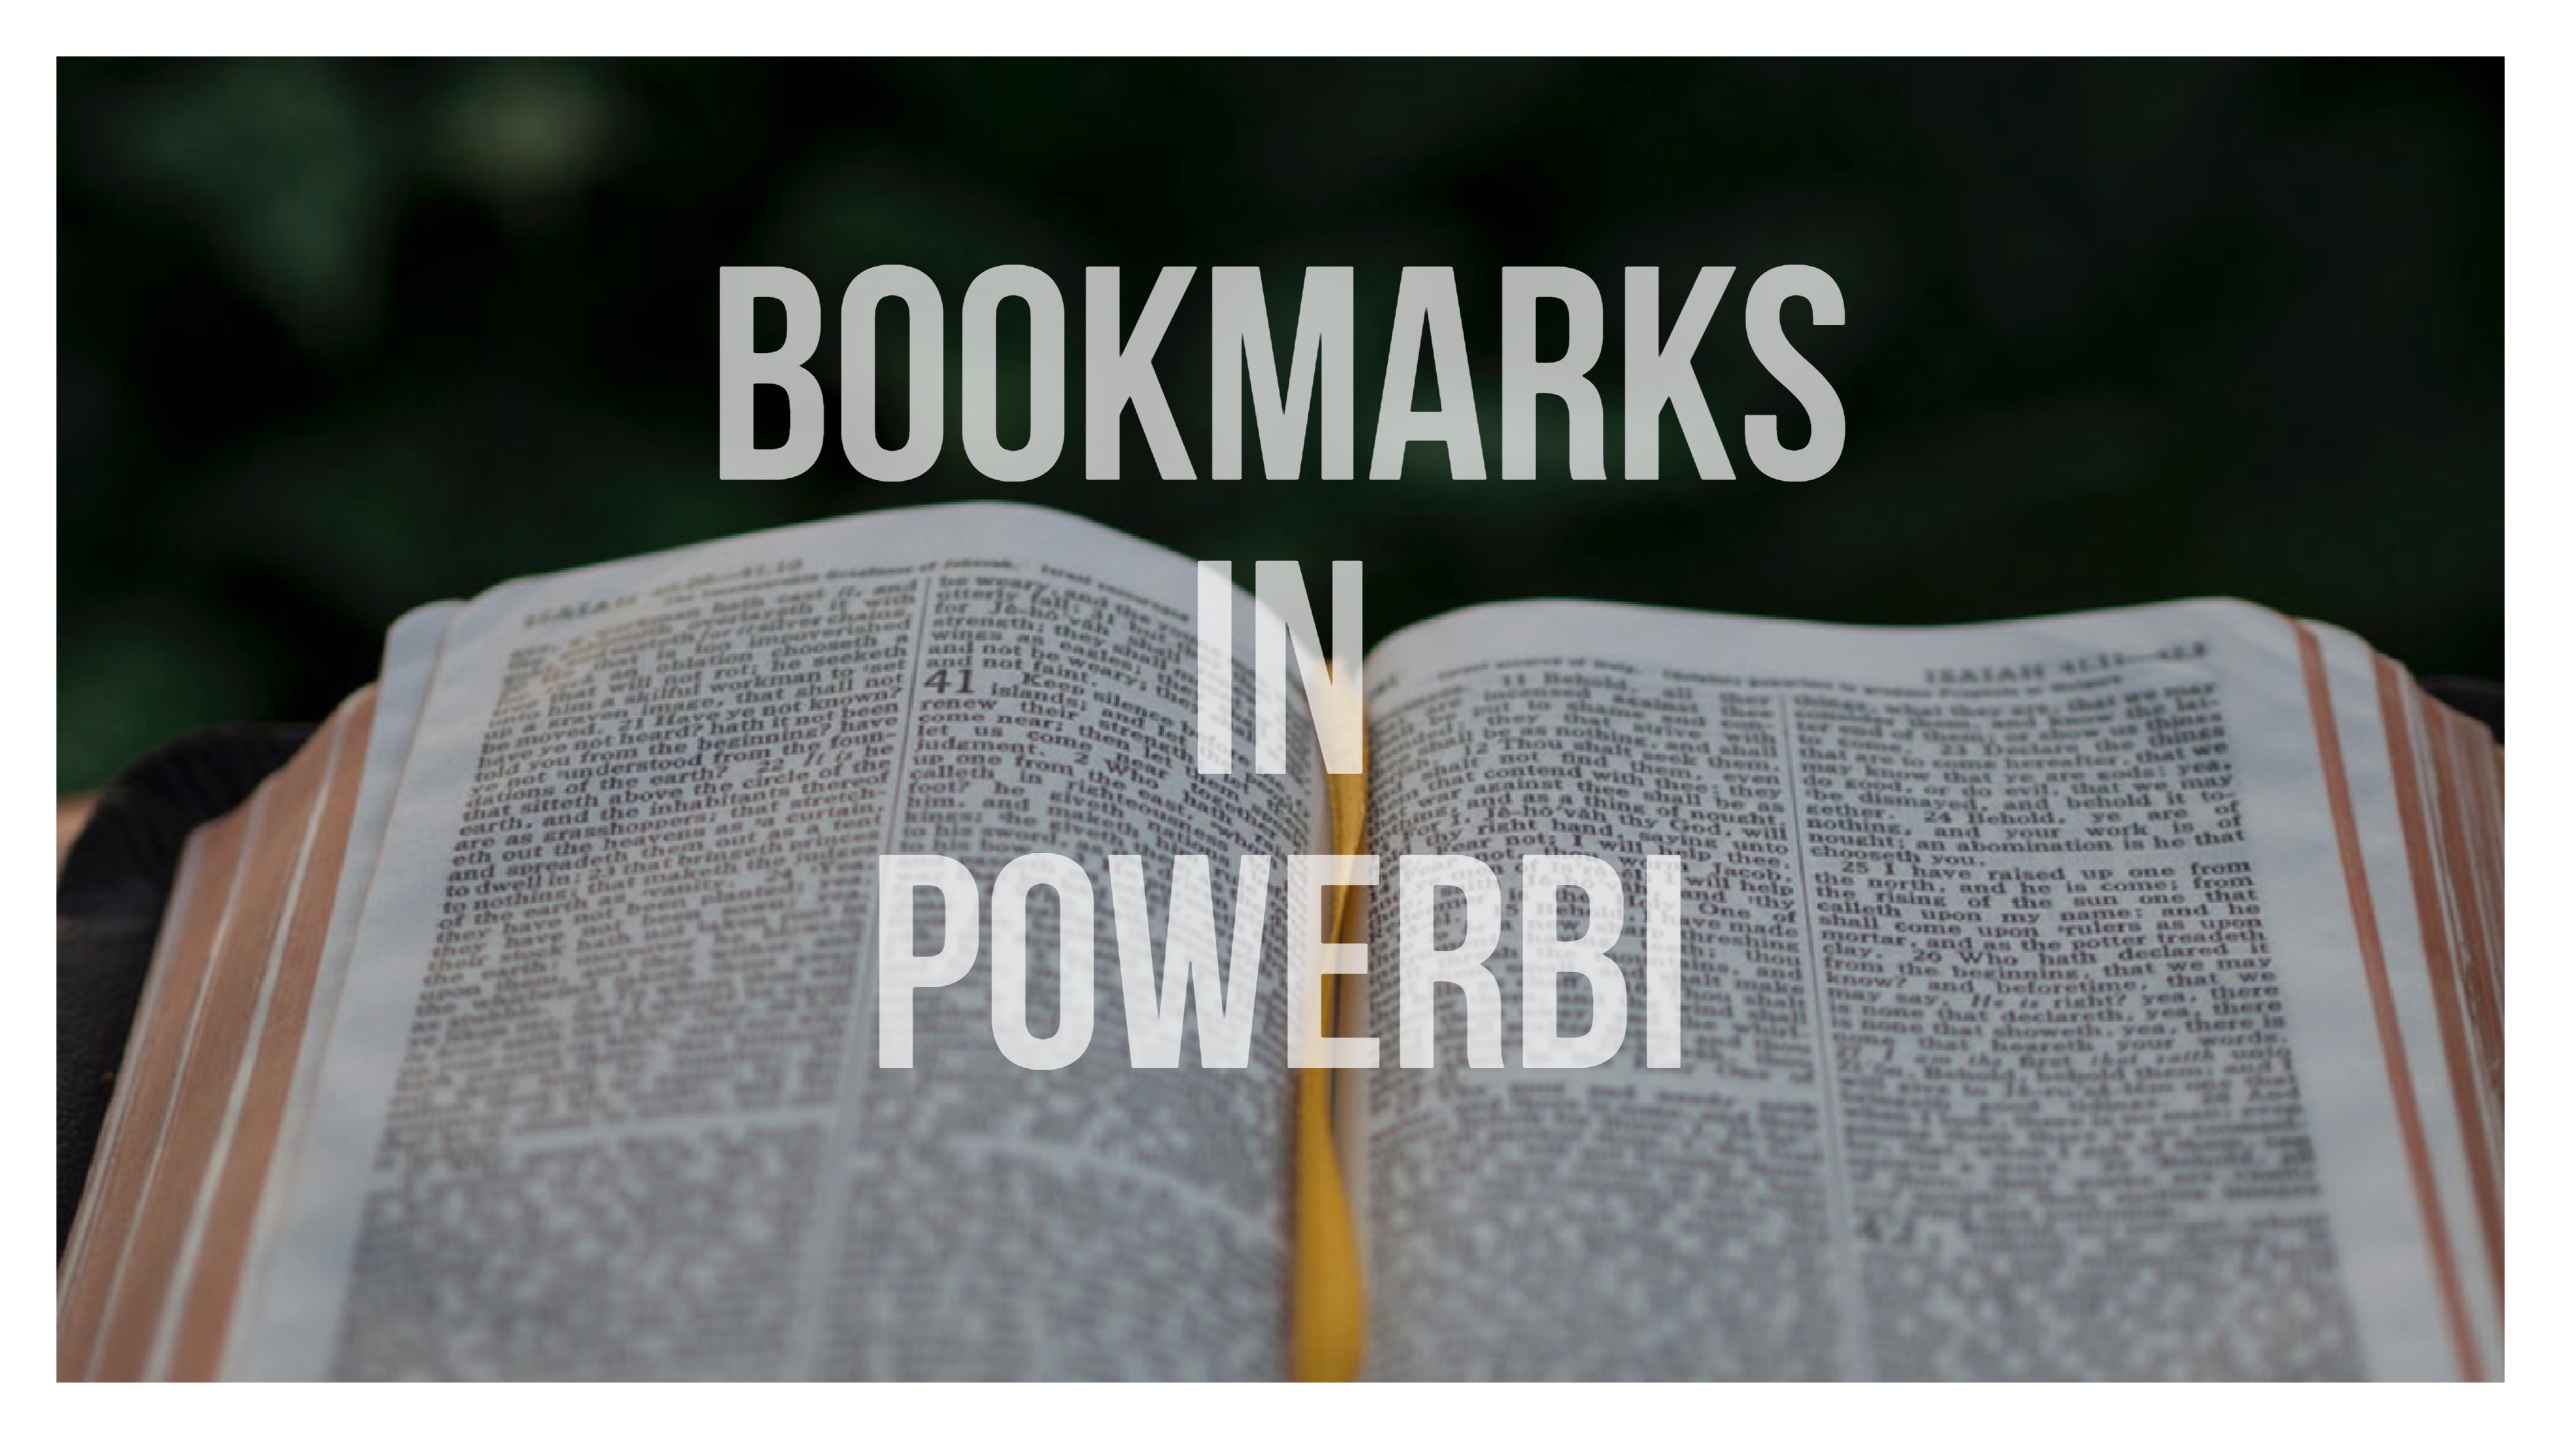 Bookmarks in PowerB